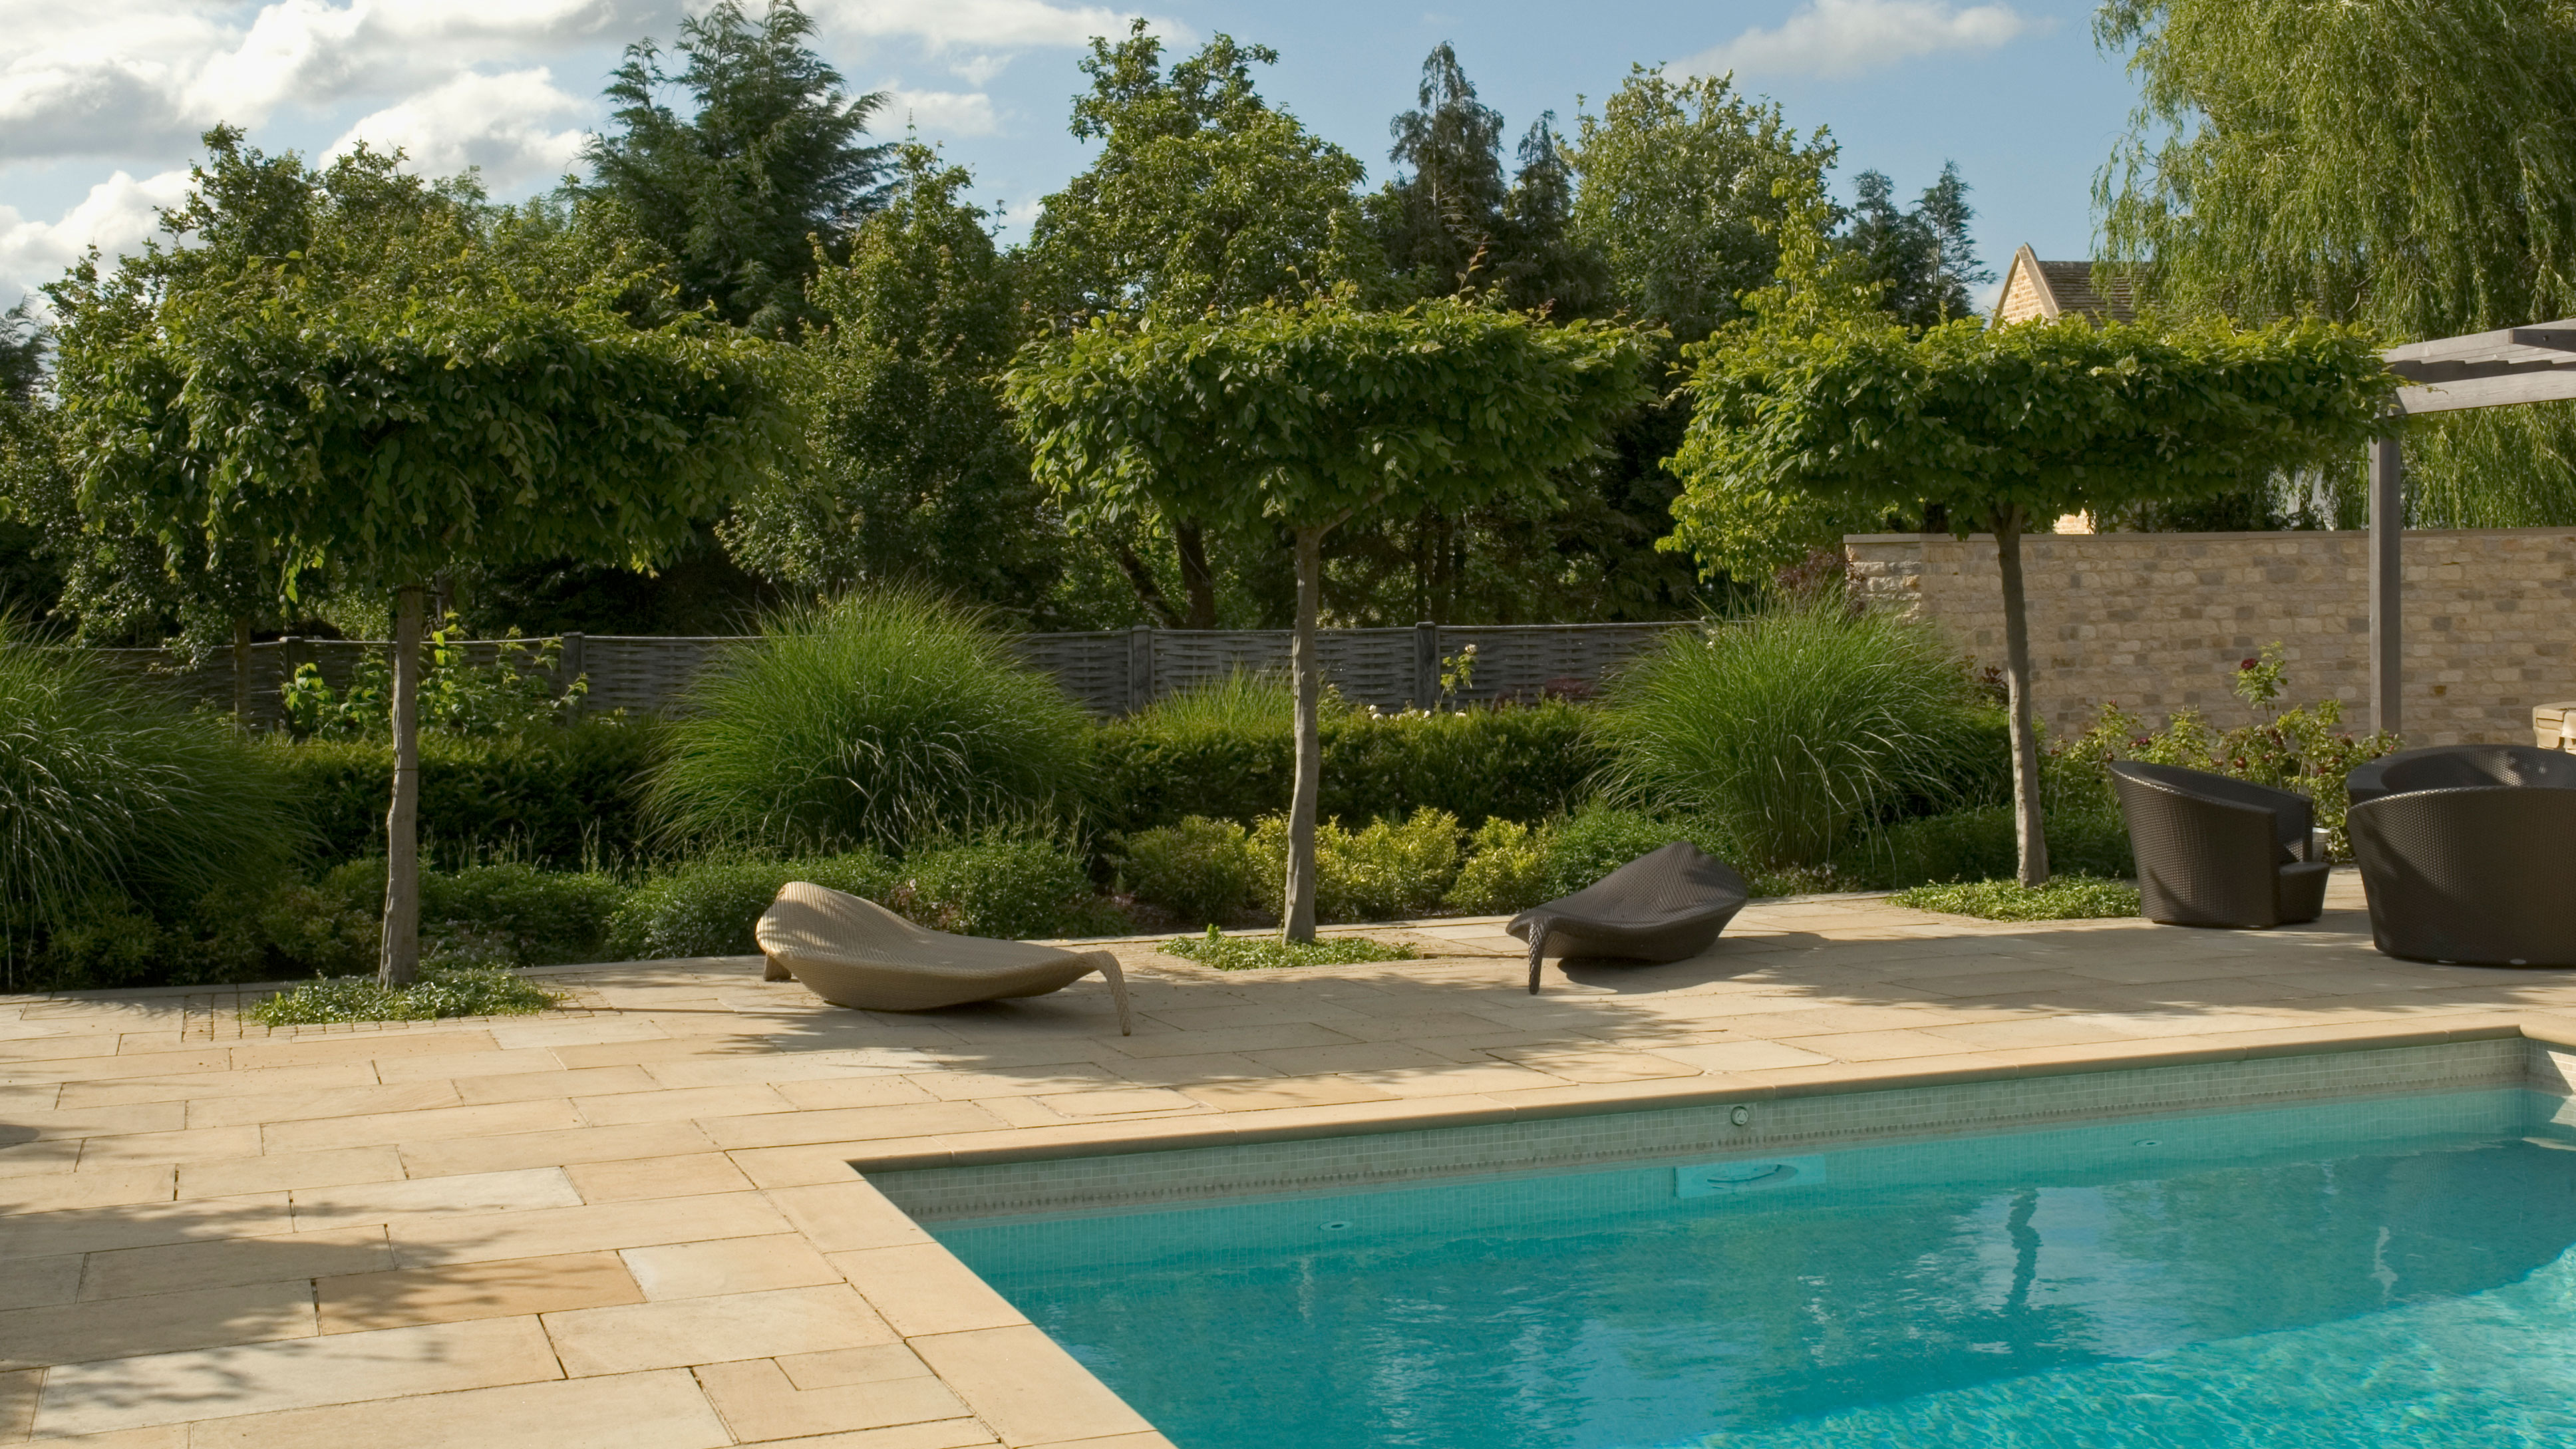 Pool Landscaping Ideas The Best, Best Patio Material Around Pool